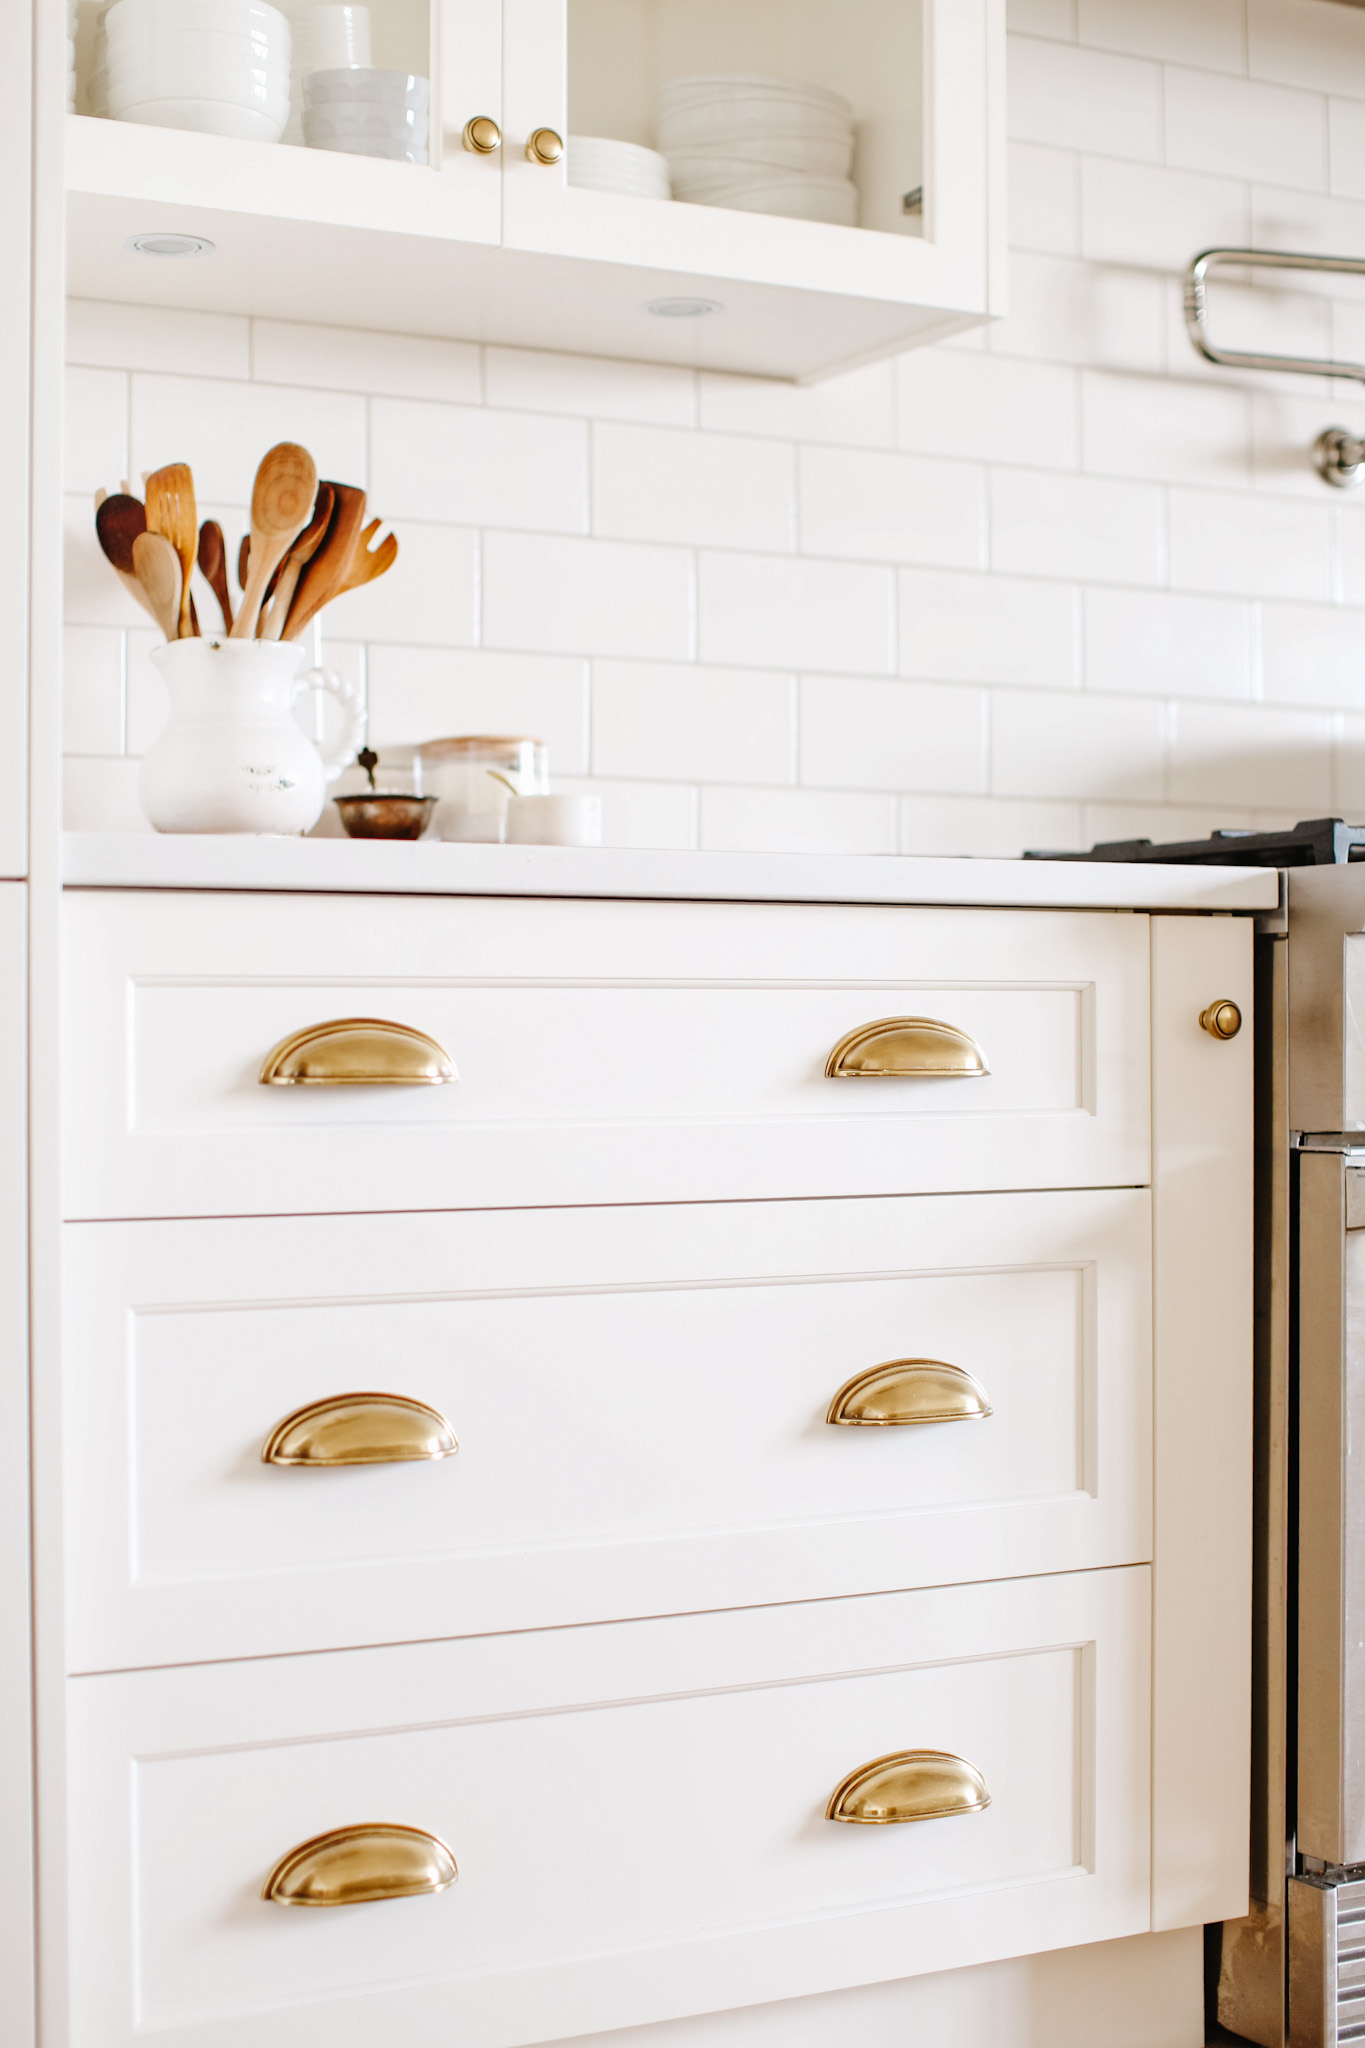 Brass cup pulls and Our Favourite Kitchen Renovation Features